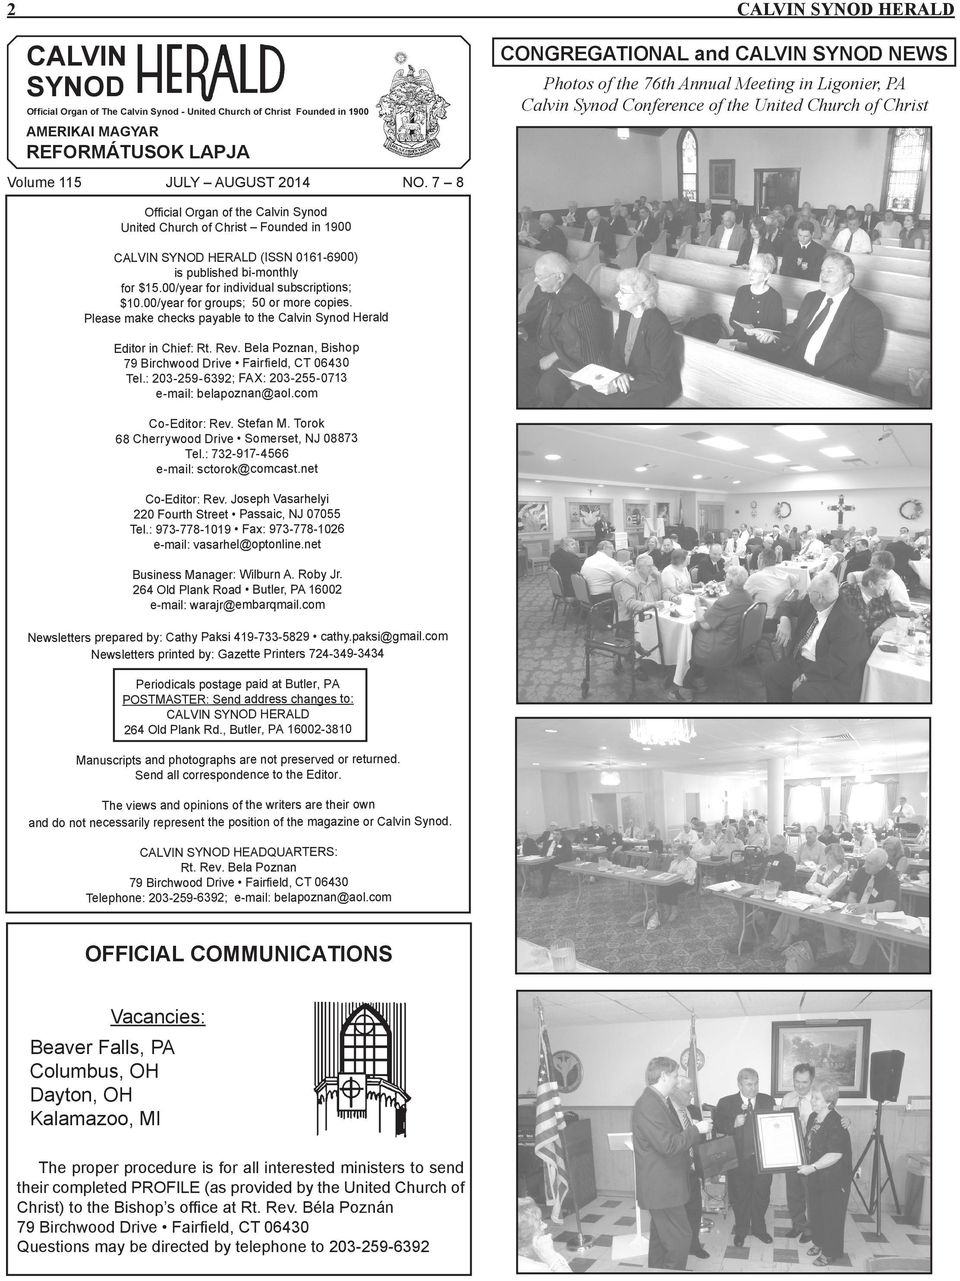 7 8 Official Organ of the Calvin Synod United Church of Christ Founded in 1900 CALVIN SYNOD HERALD (ISSN 0161-6900) is published bi-monthly for $15.00/year for individual subscriptions; $10.